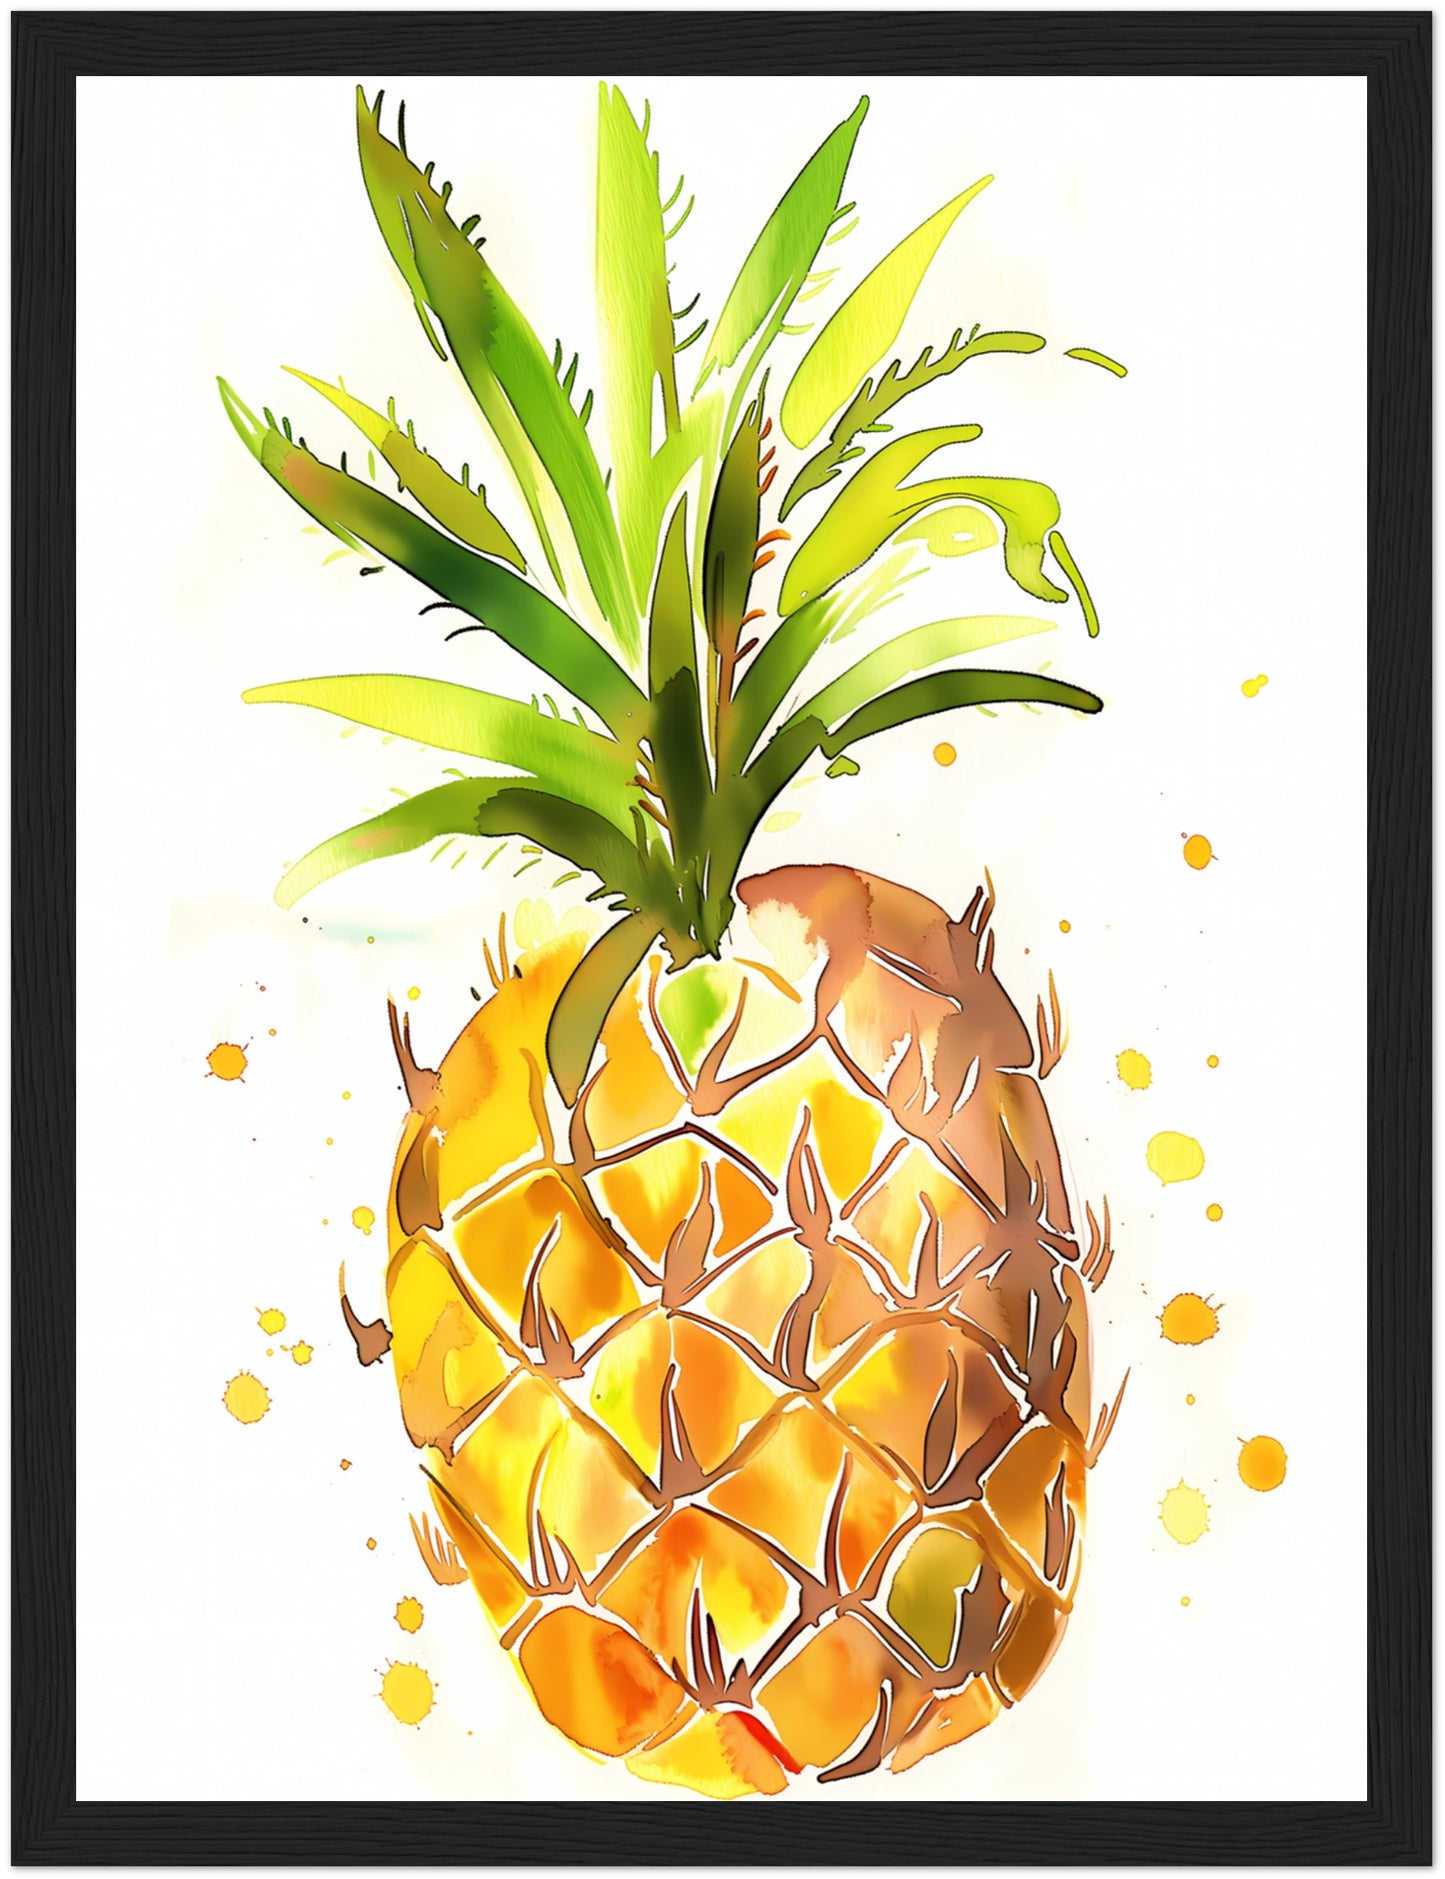 Watercolor painting of a pineapple with paint splatters around it.